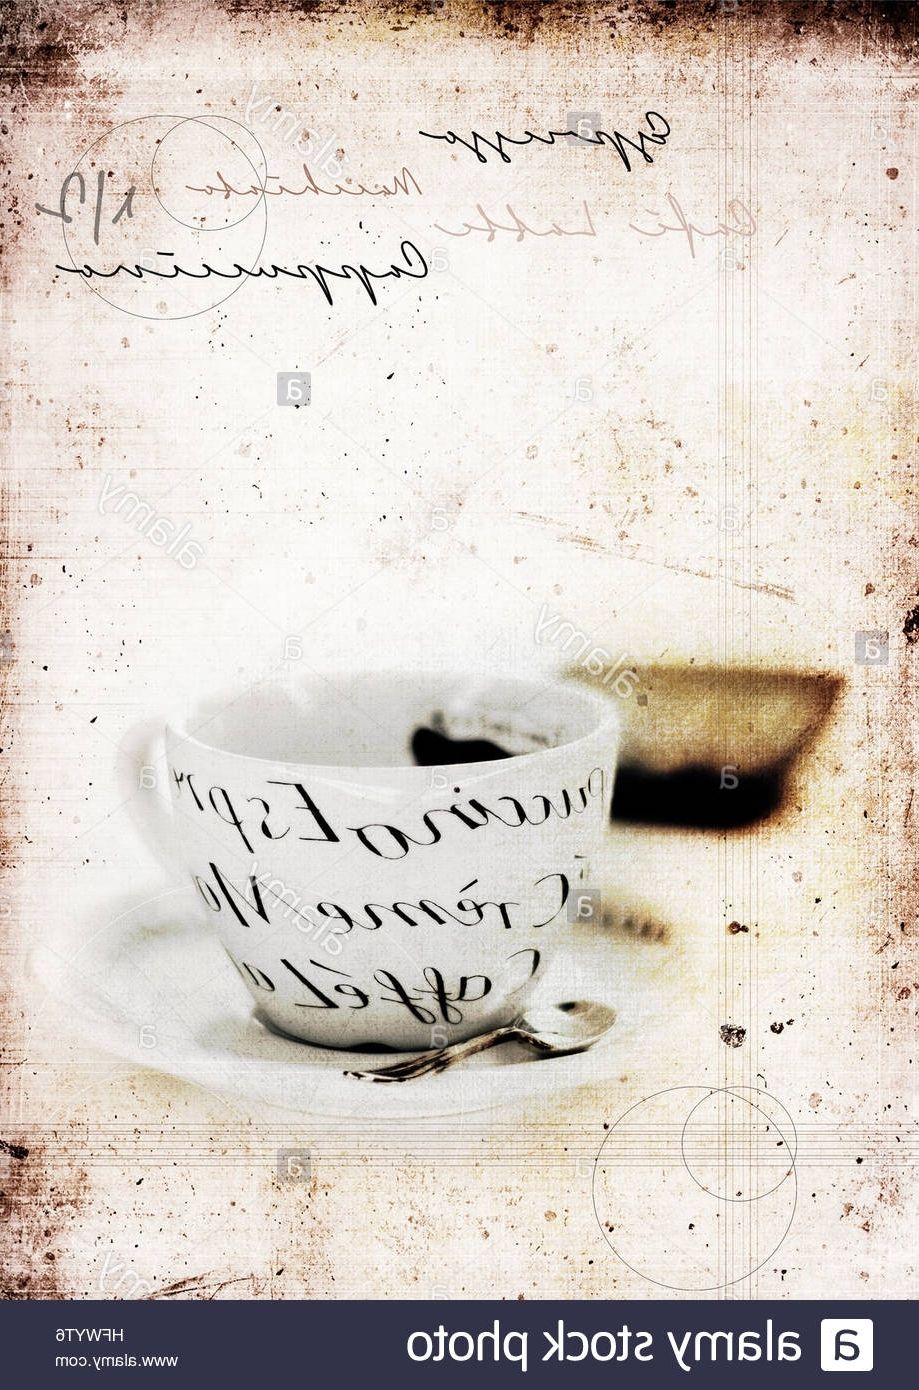 Grunge Graffiti Effect Image Of Classic Italian Coffee Cup And Pertaining To Current Italian Coffee Wall Art (View 3 of 15)